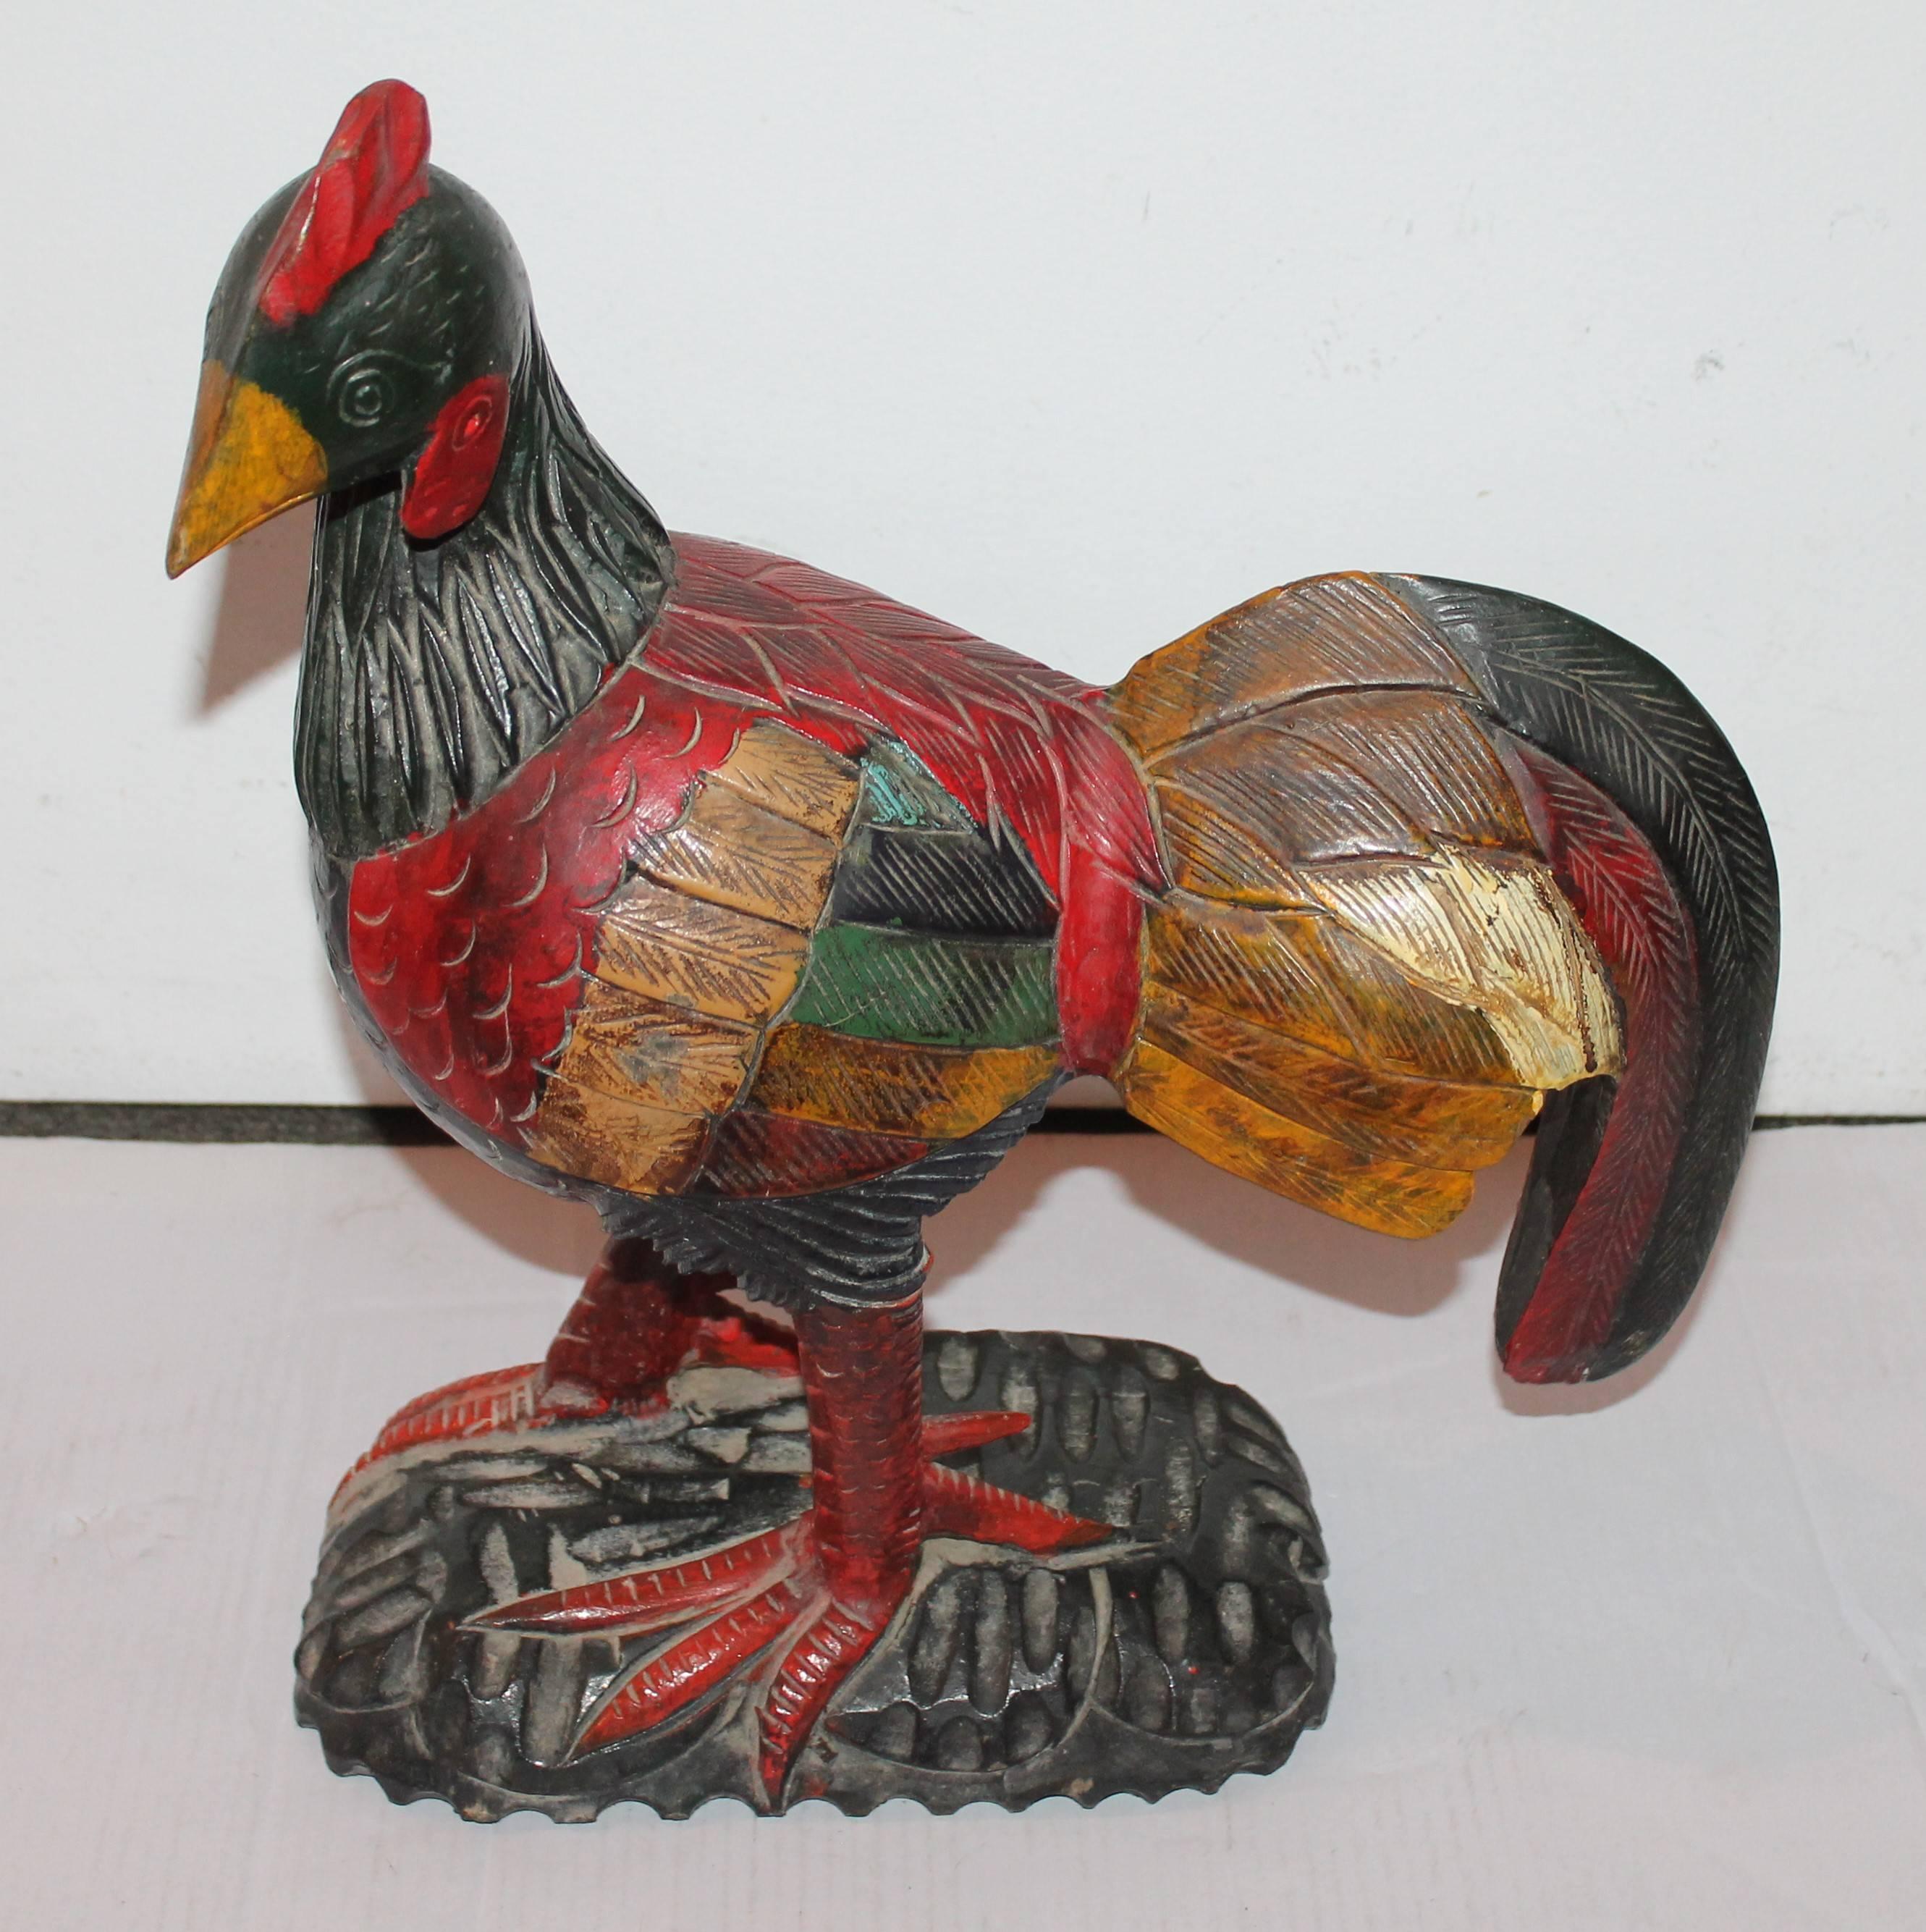 This folky hand-carved rooster has a wonderful painted surface and in great condition. This big guy has no markings as to wear it is from and we are assuming it is from Mexico. The untouched painted surface is truly wonderful and very whimsical.